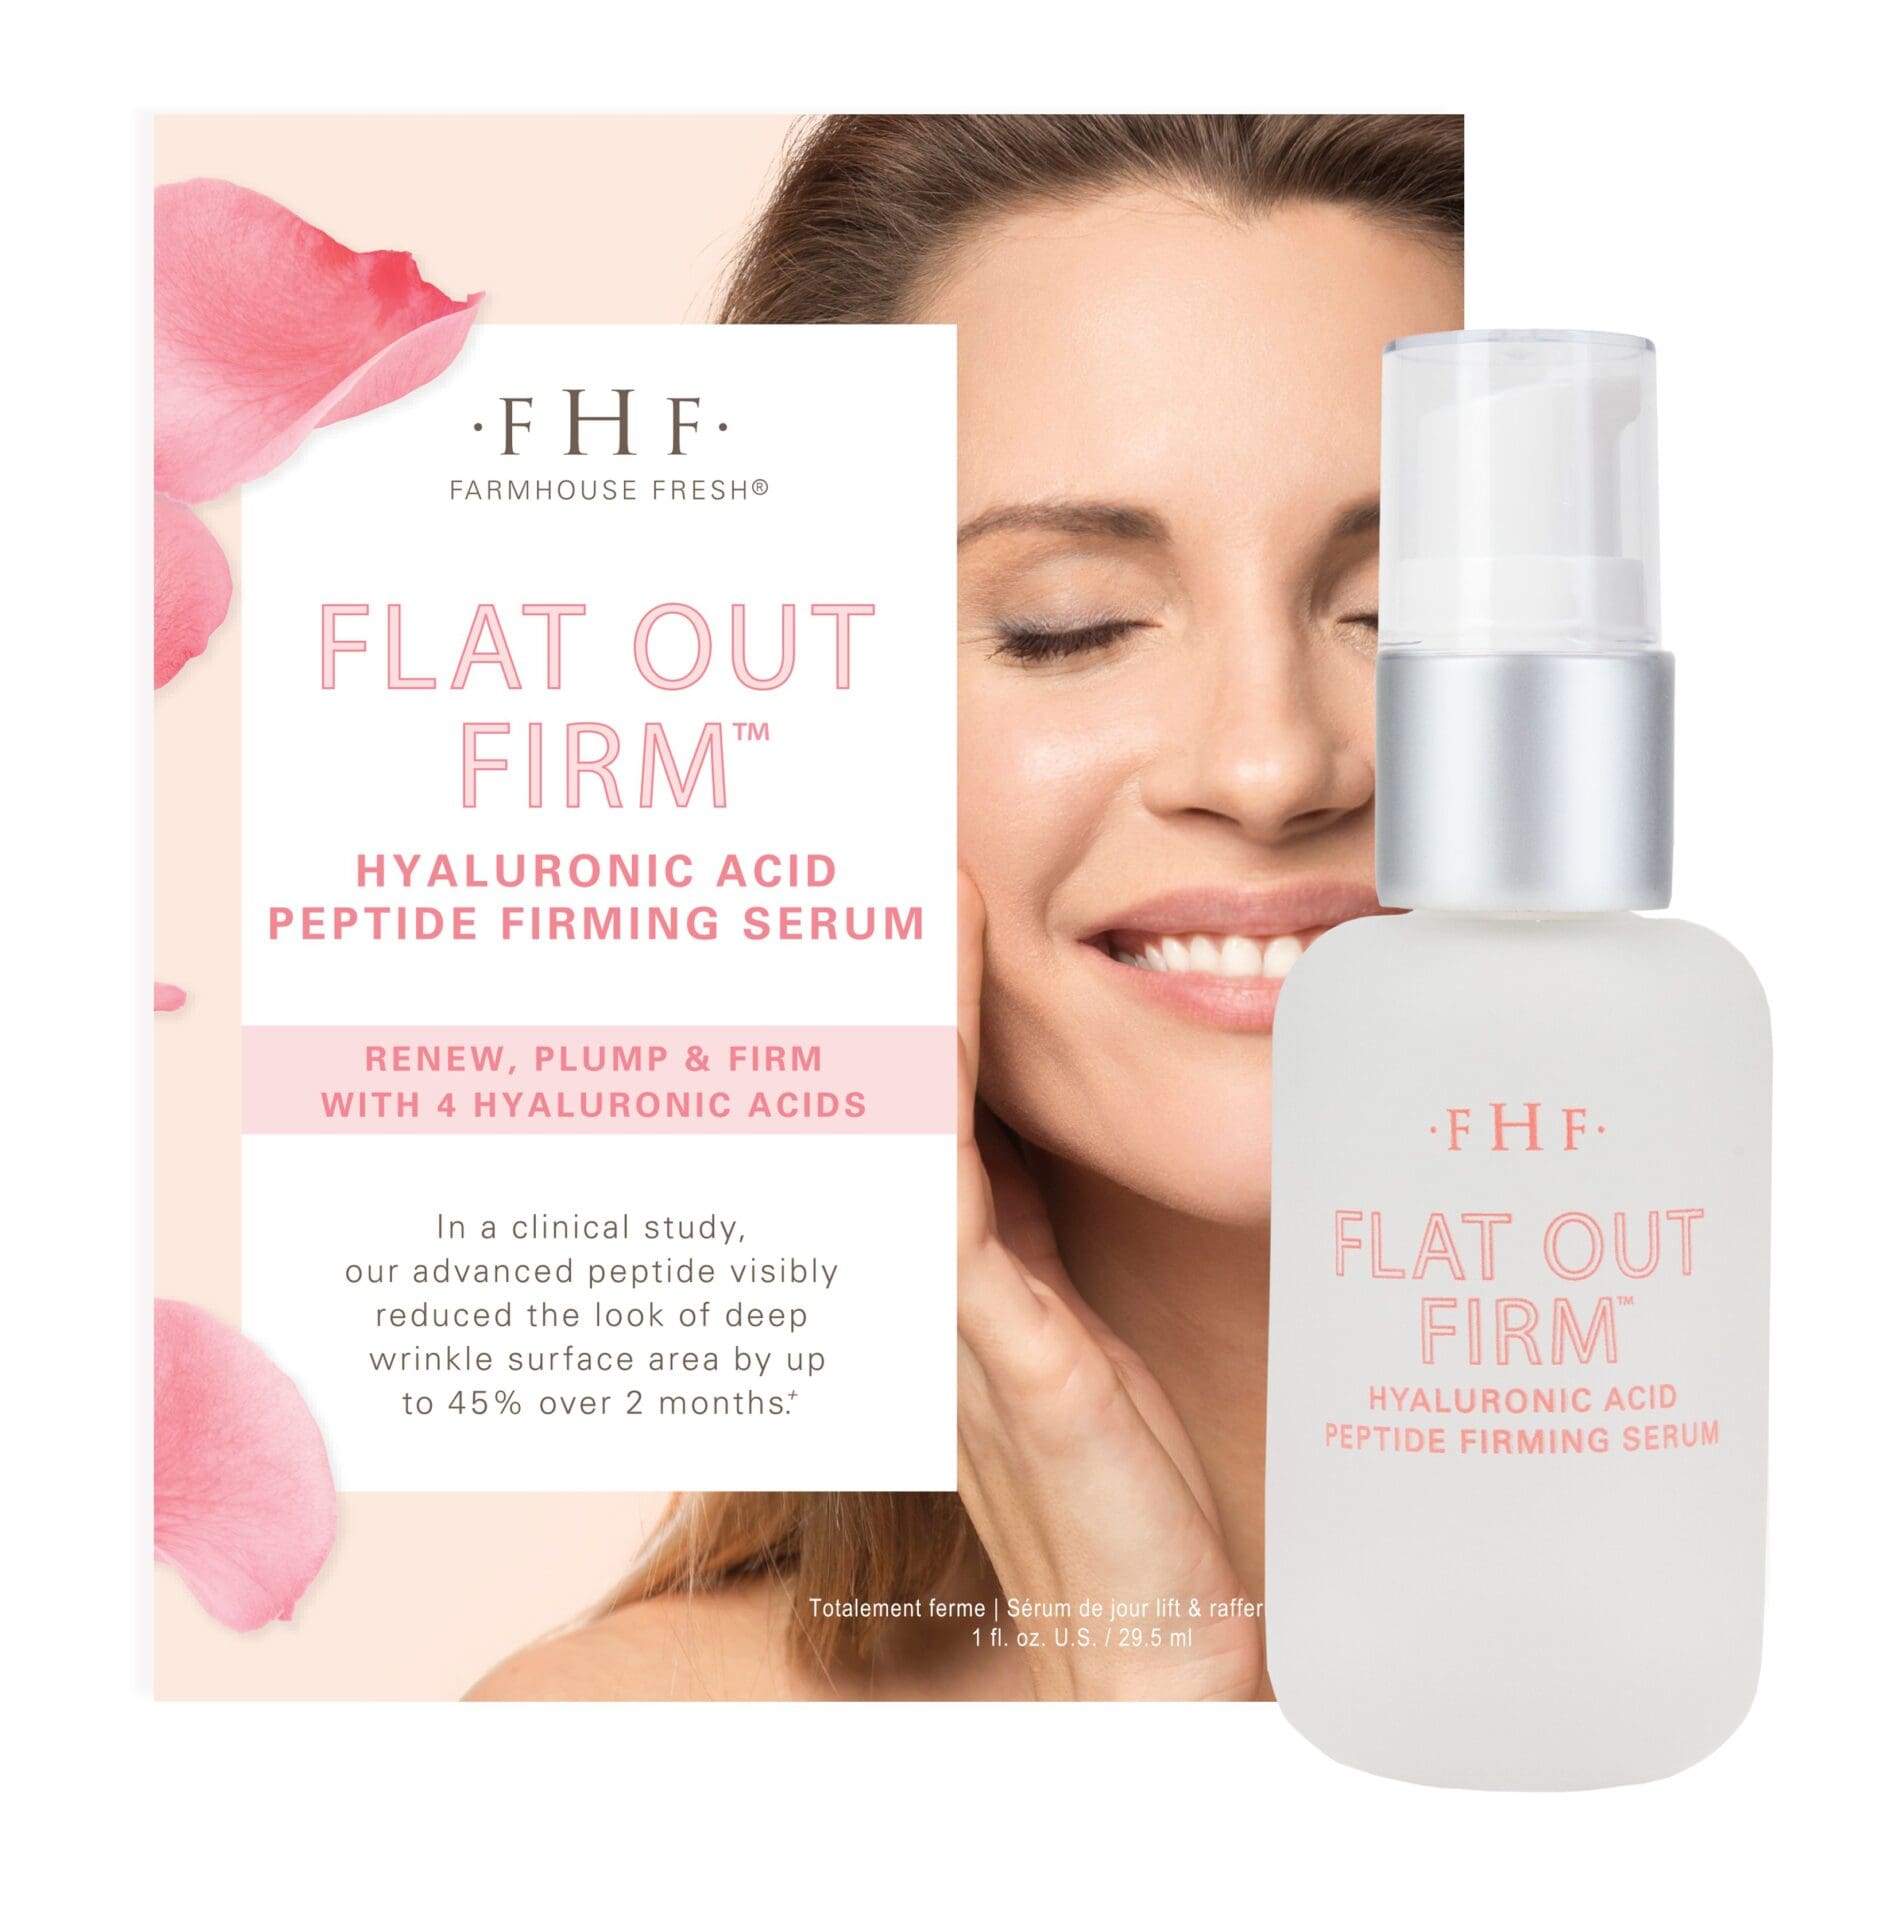 A package of facial firming serum and a woman with pink lipstick.